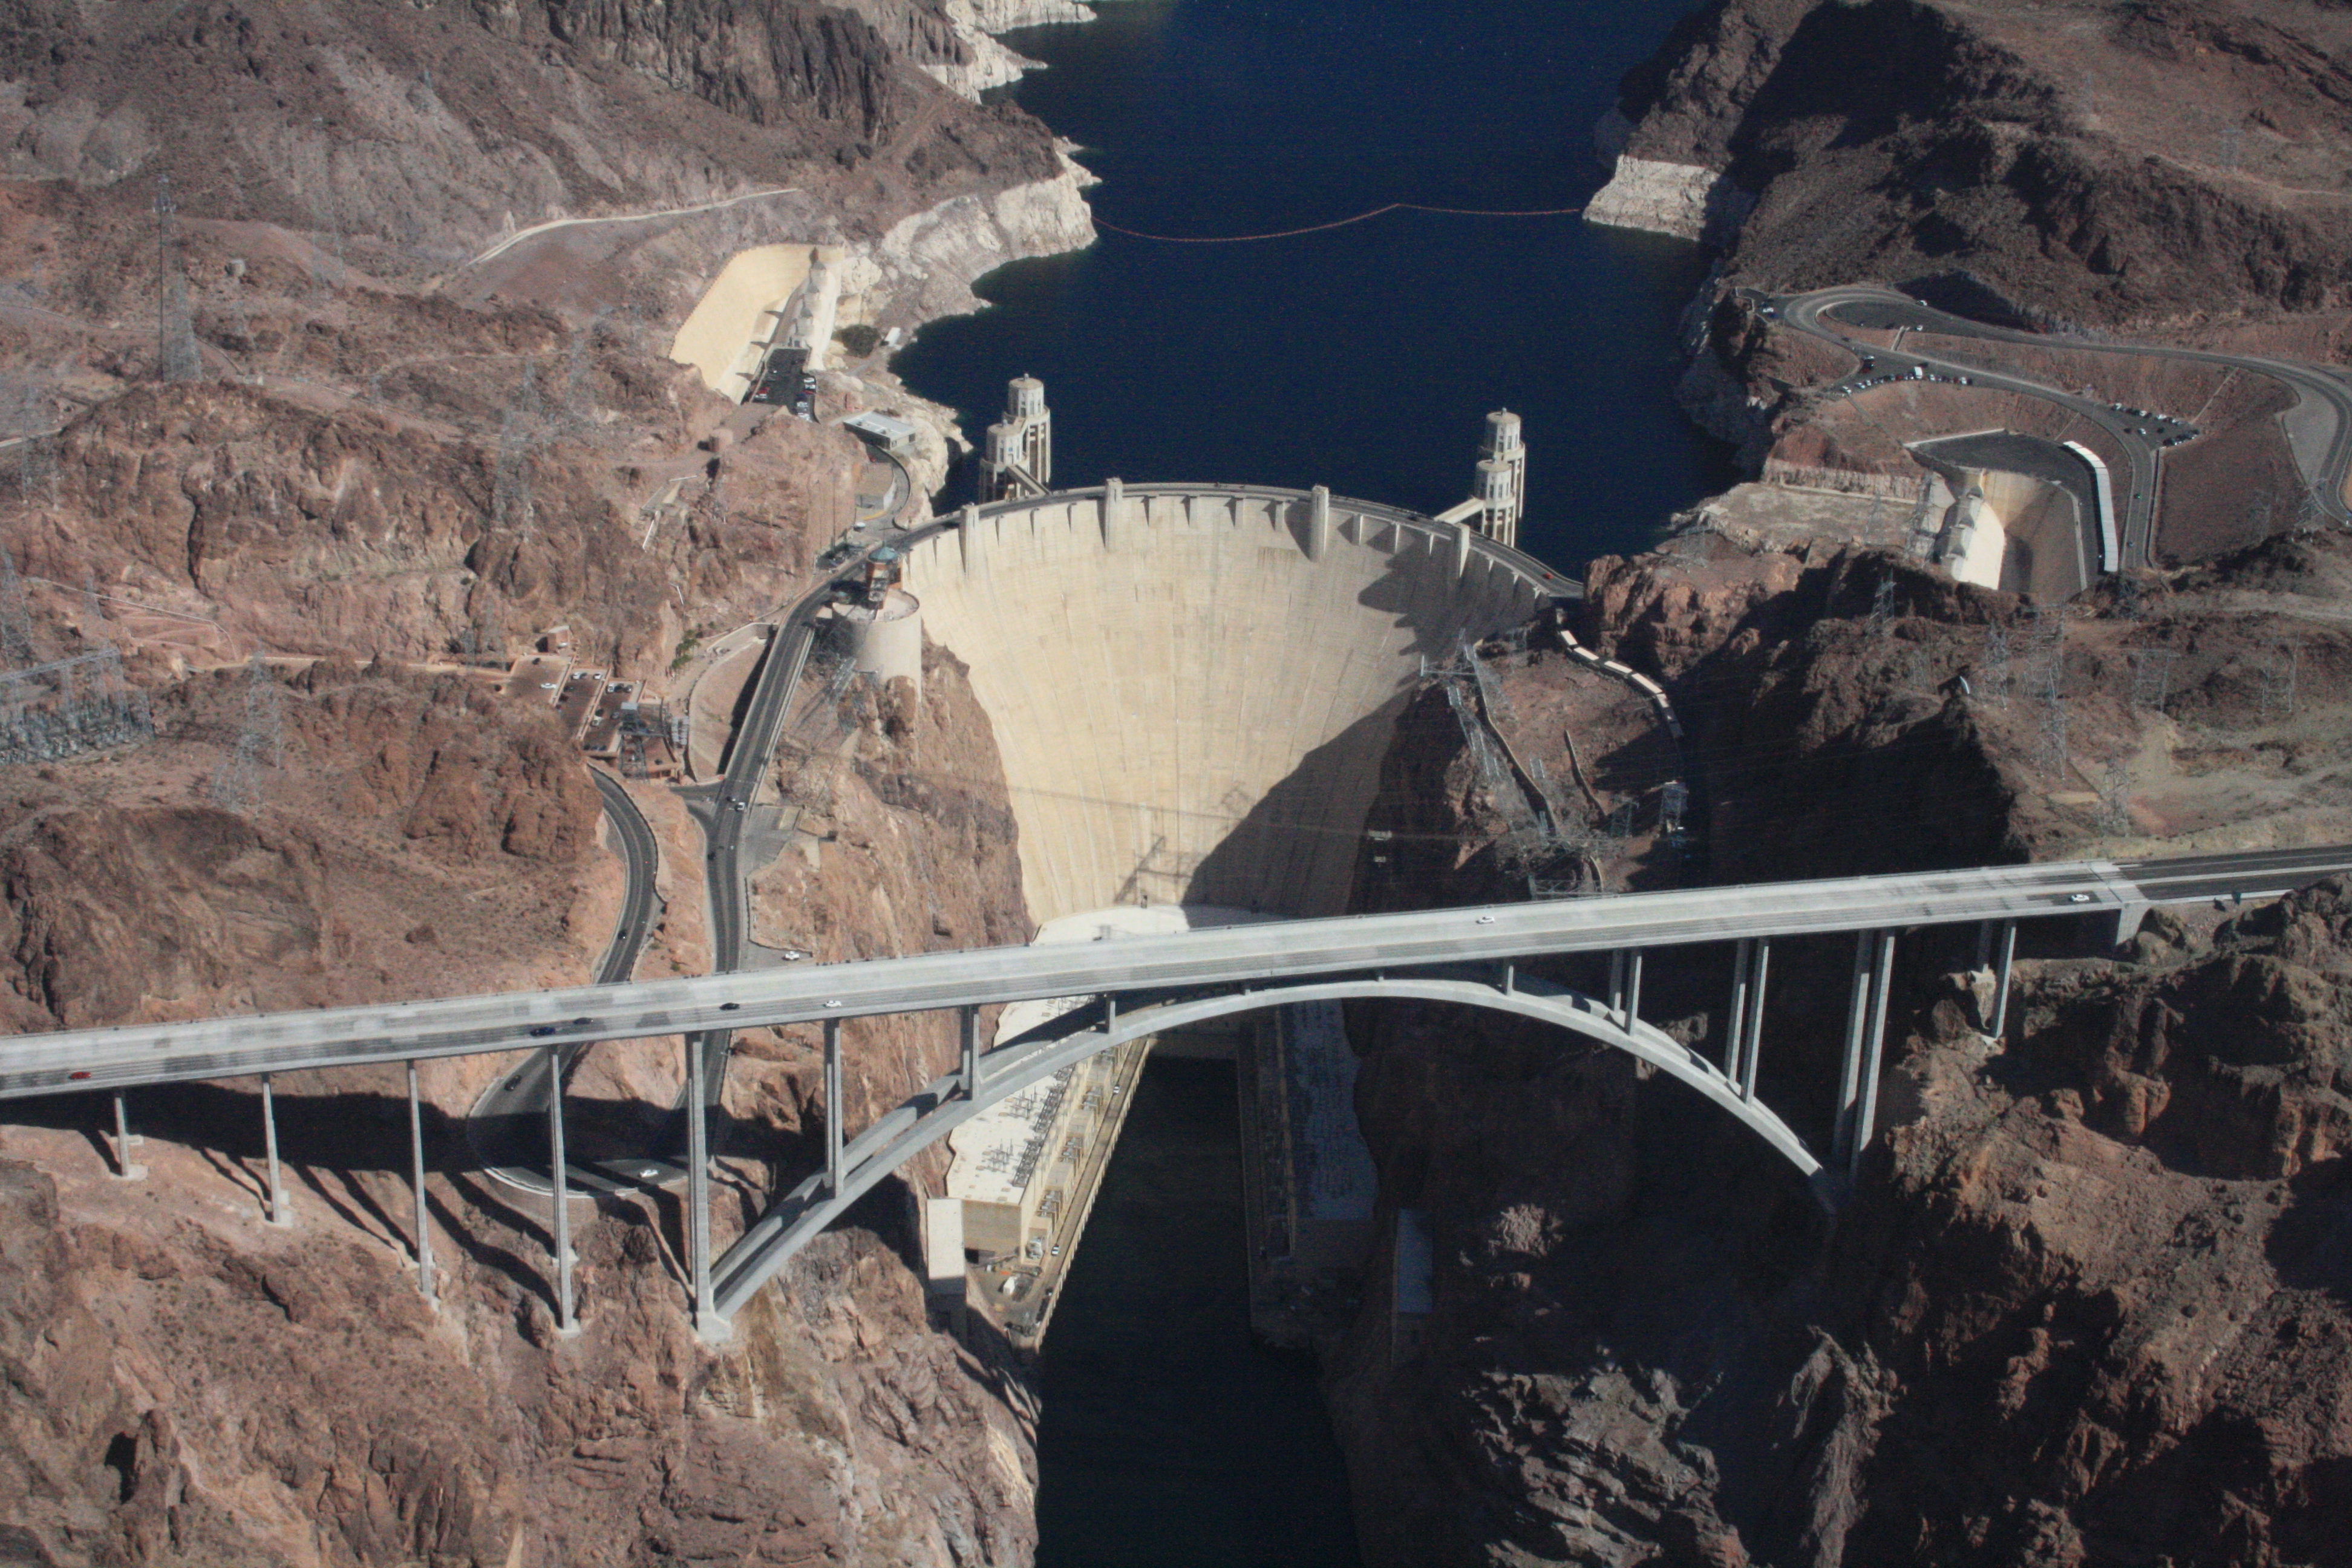 Hoover Dam Pics, Man Made Collection